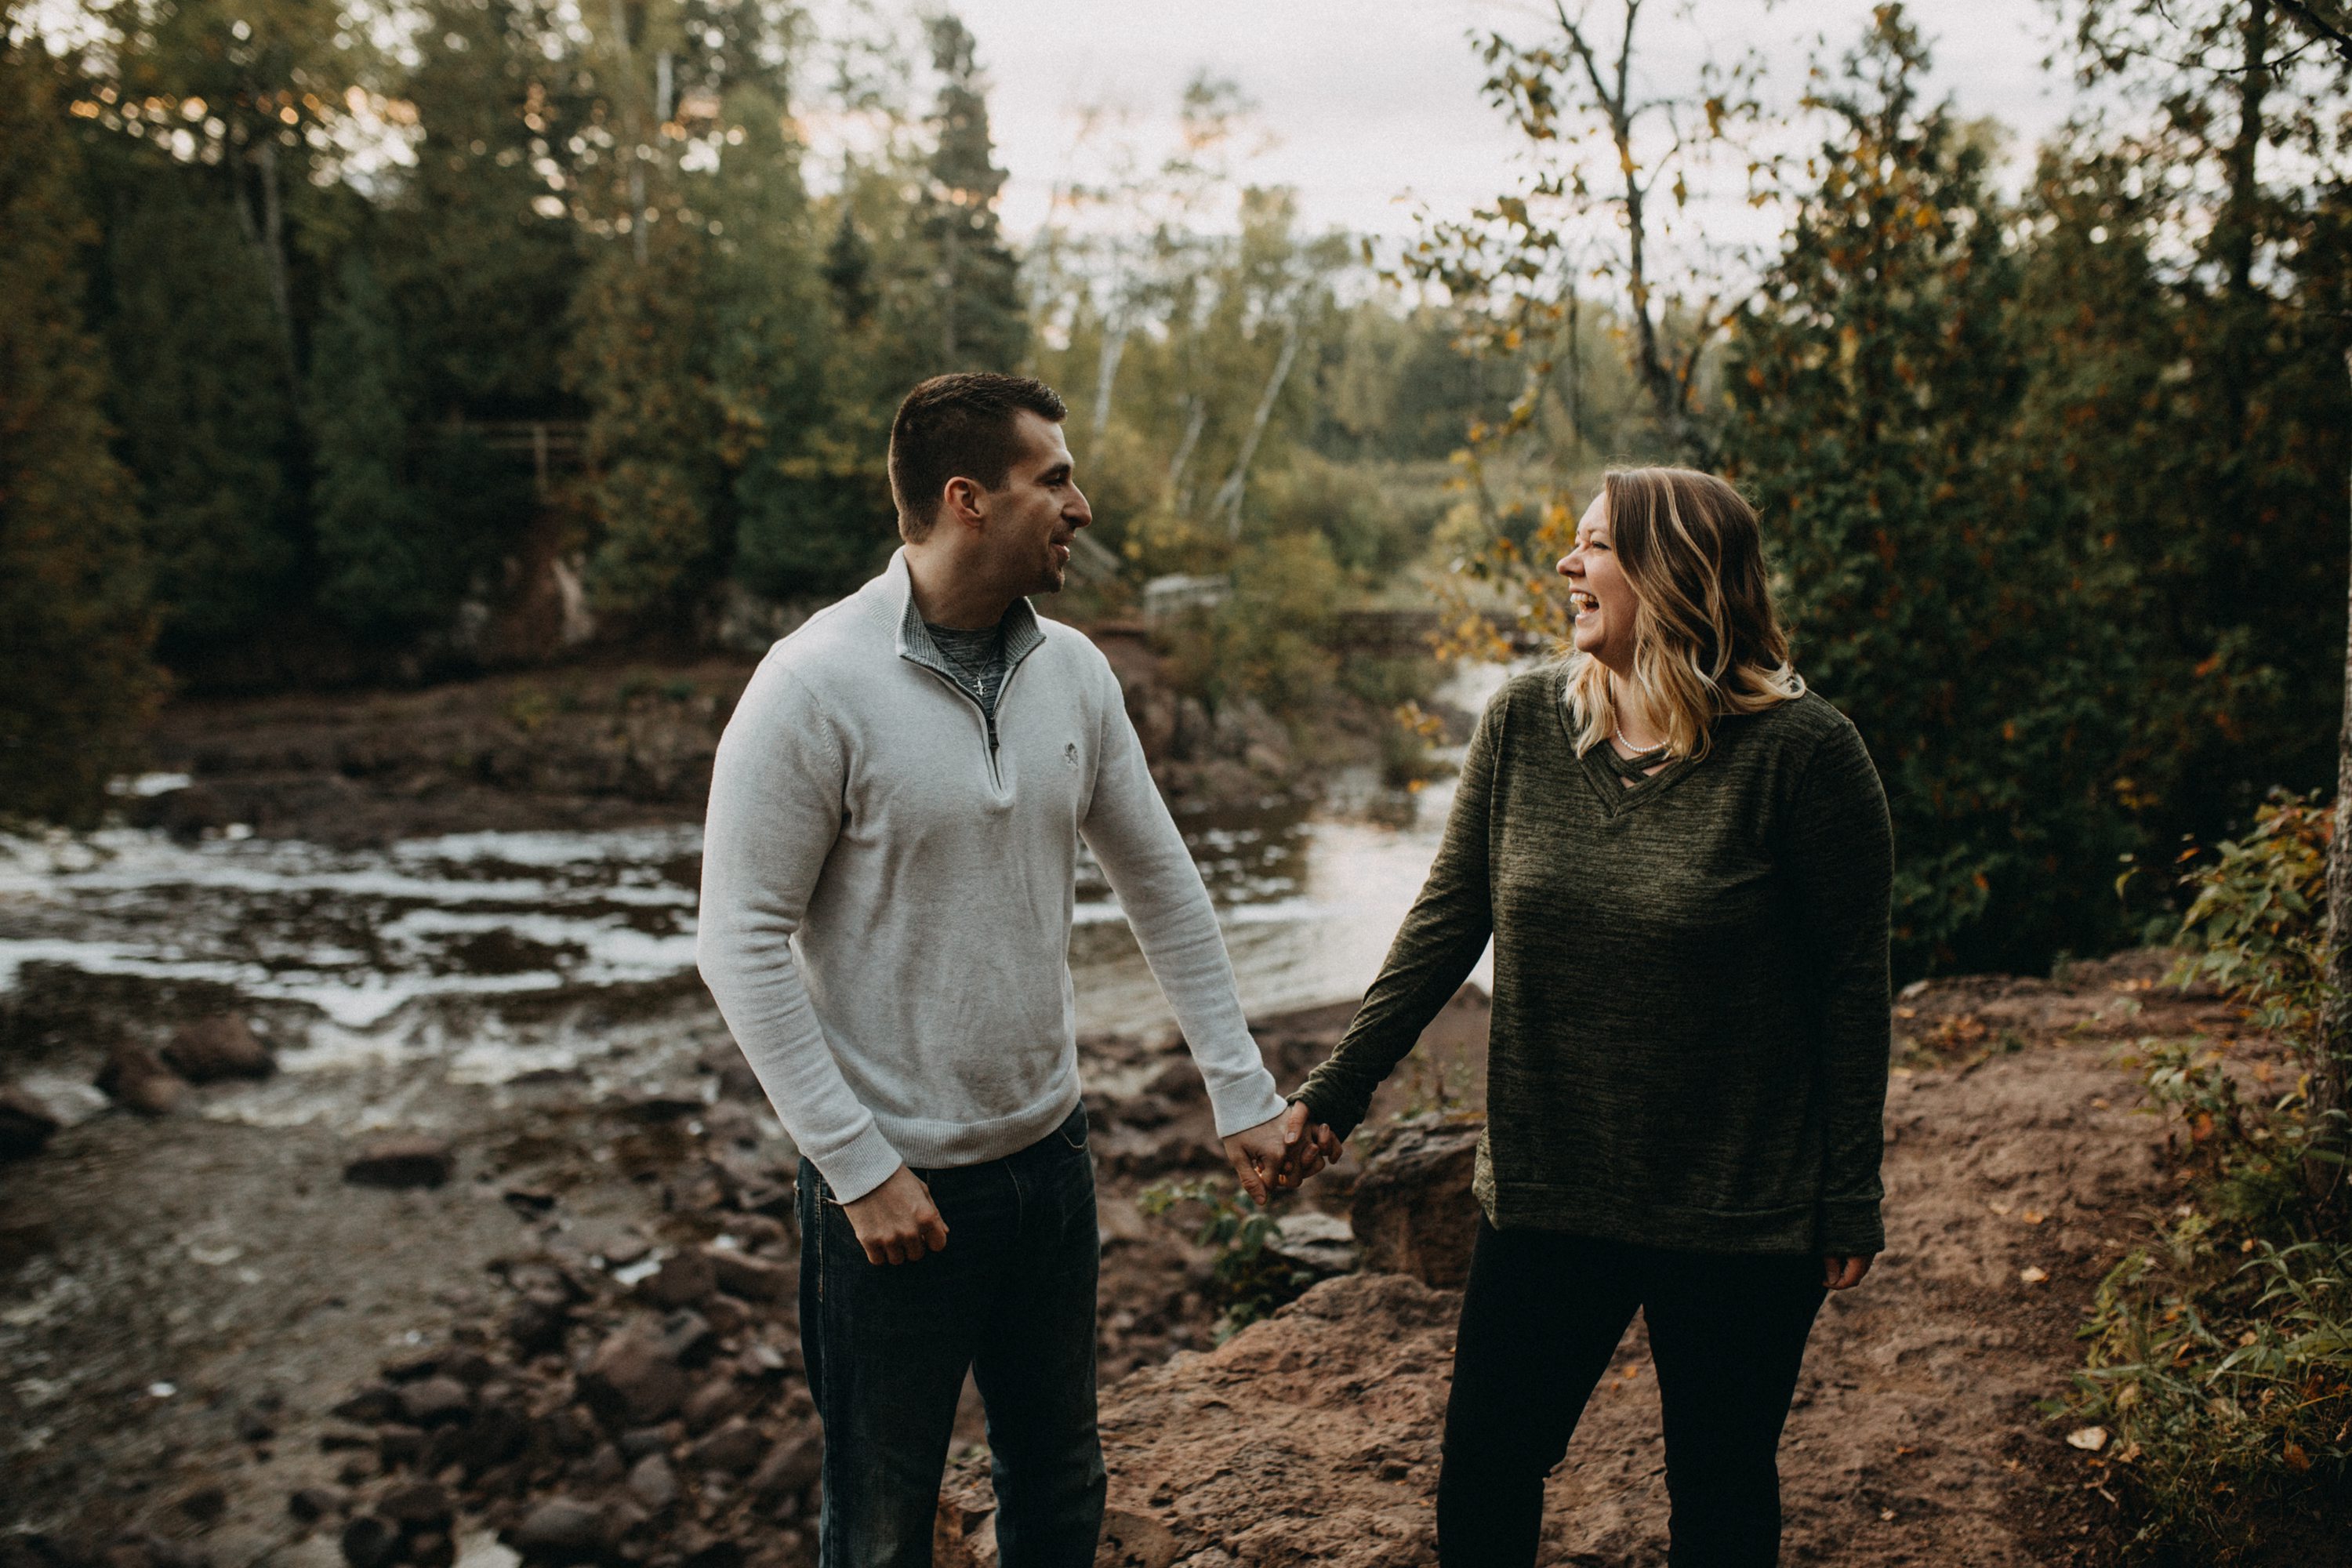 outdoor engagement session,woodsy engagement session,gooseberry falls engagement session,gooseberry falls state park,north shore engagement session